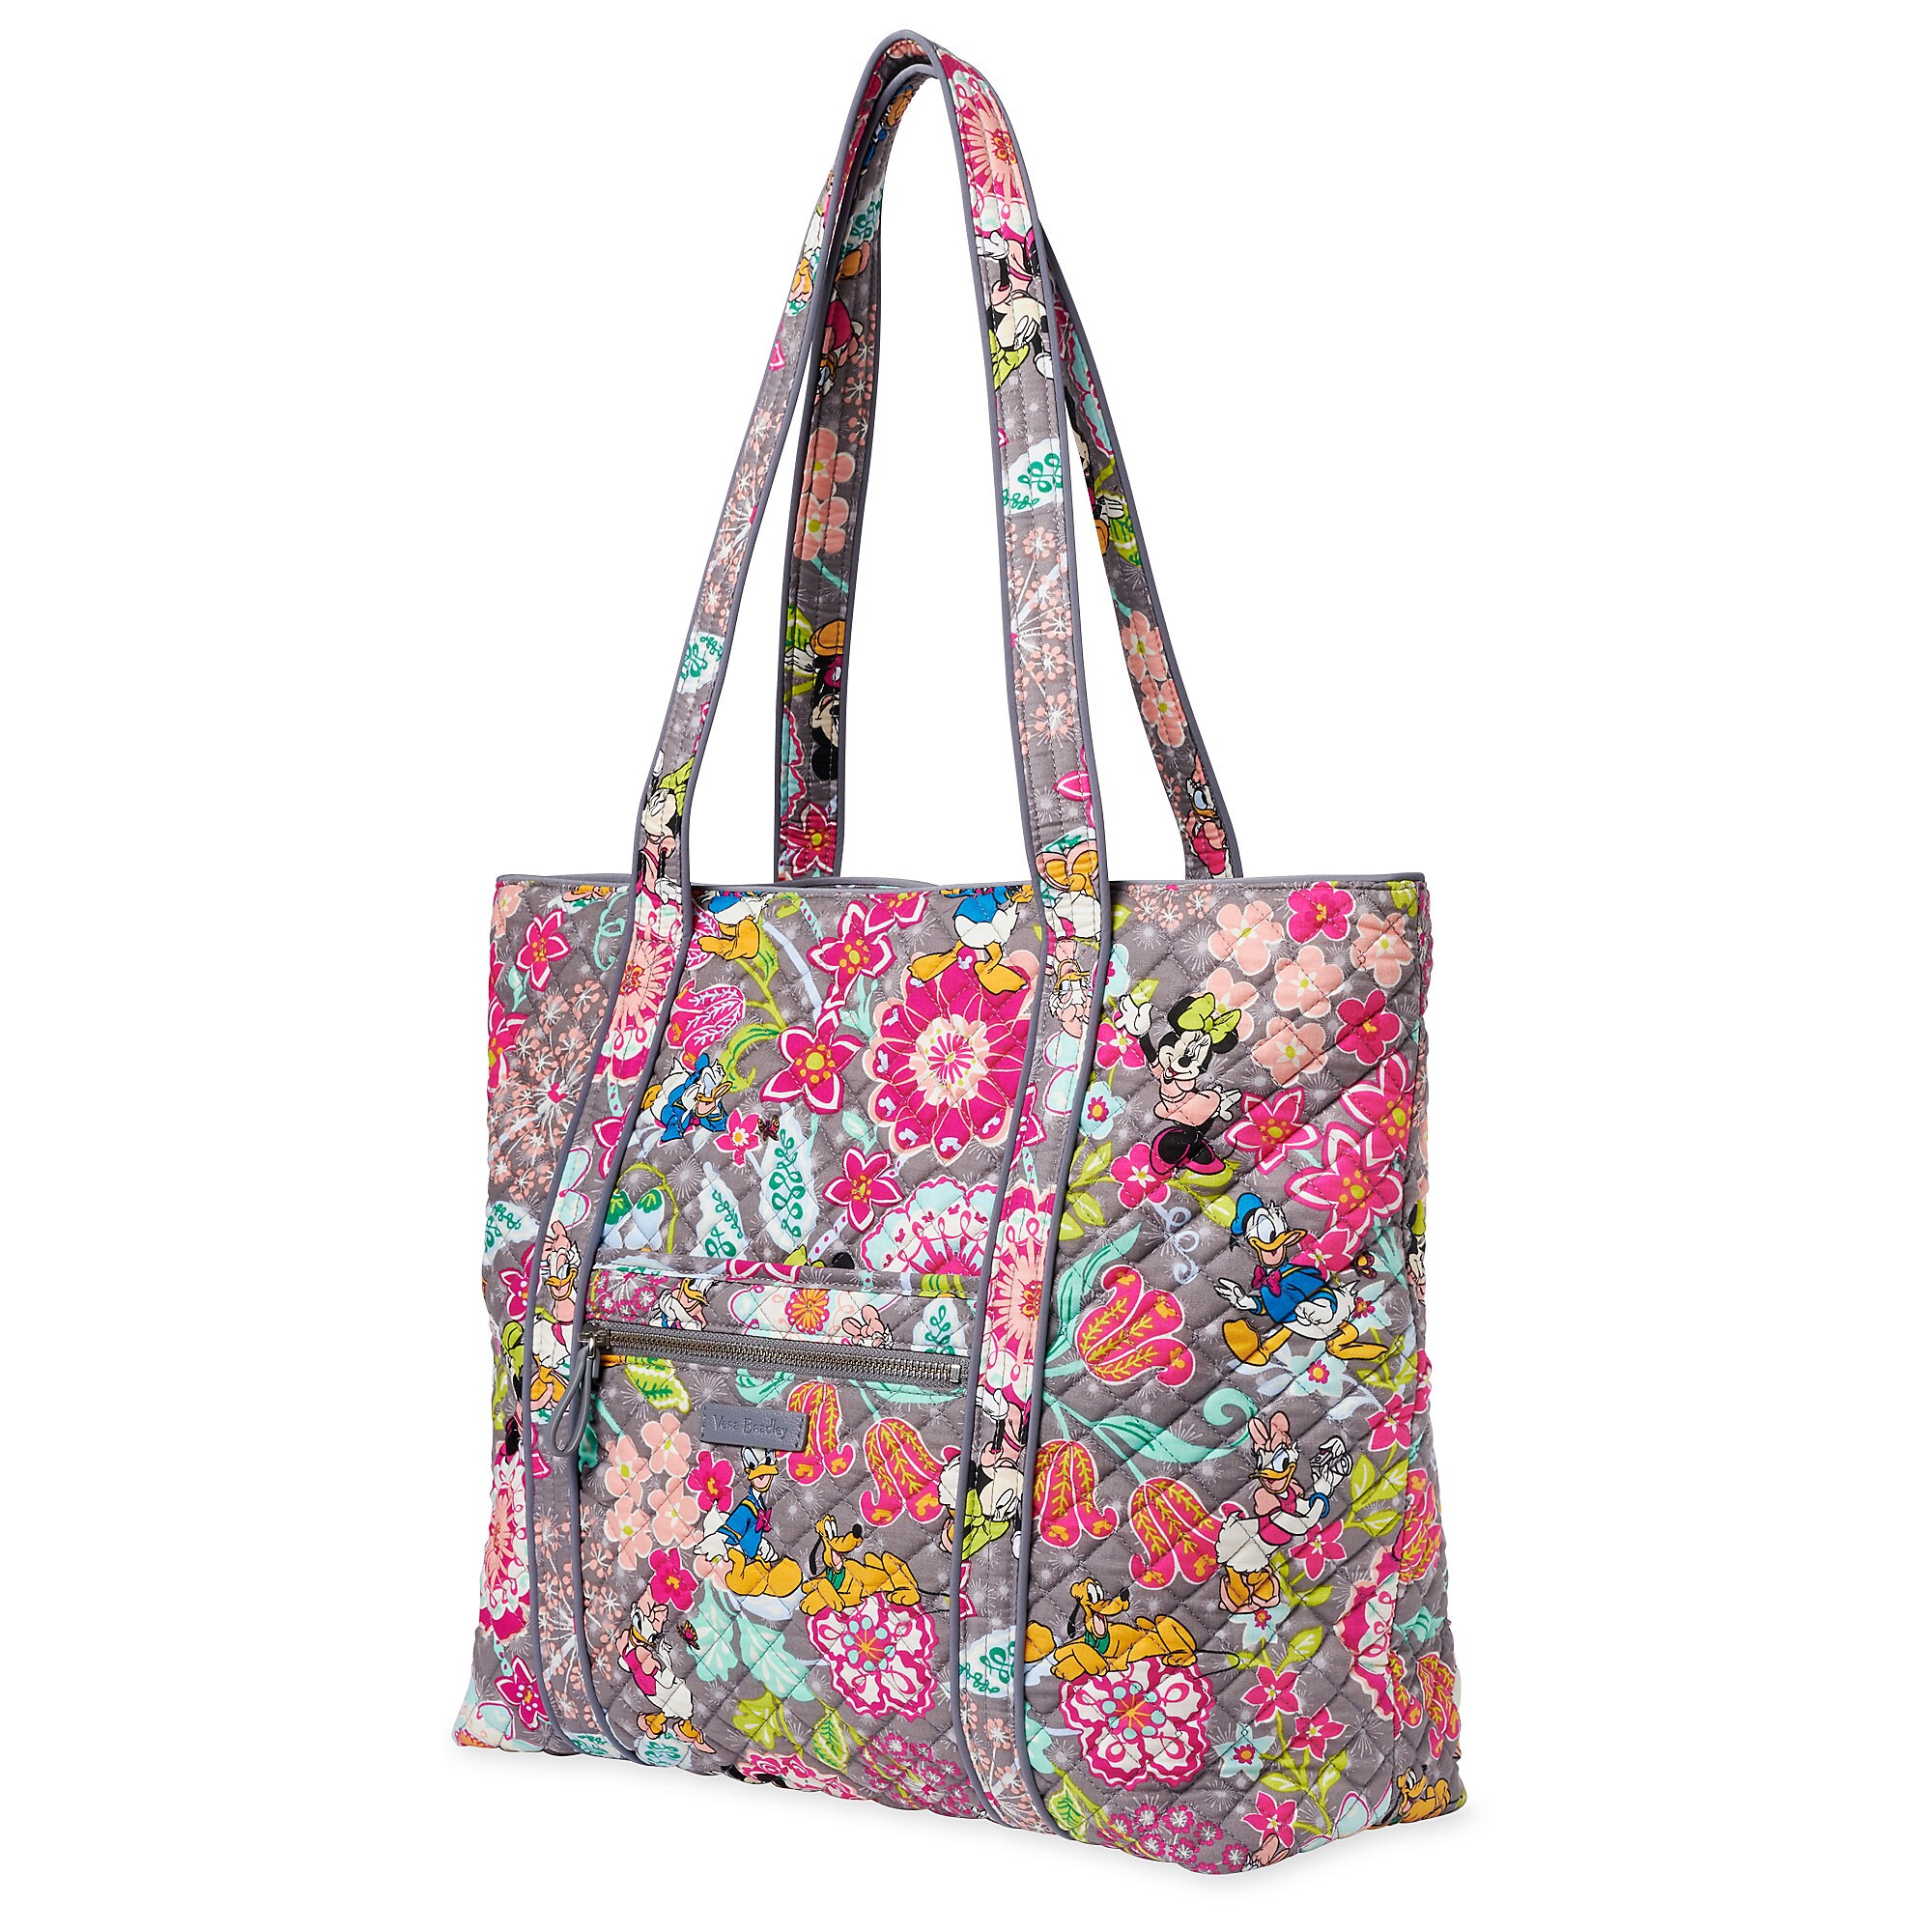 Mickey Mouse and Friends Tote by Vera Bradley